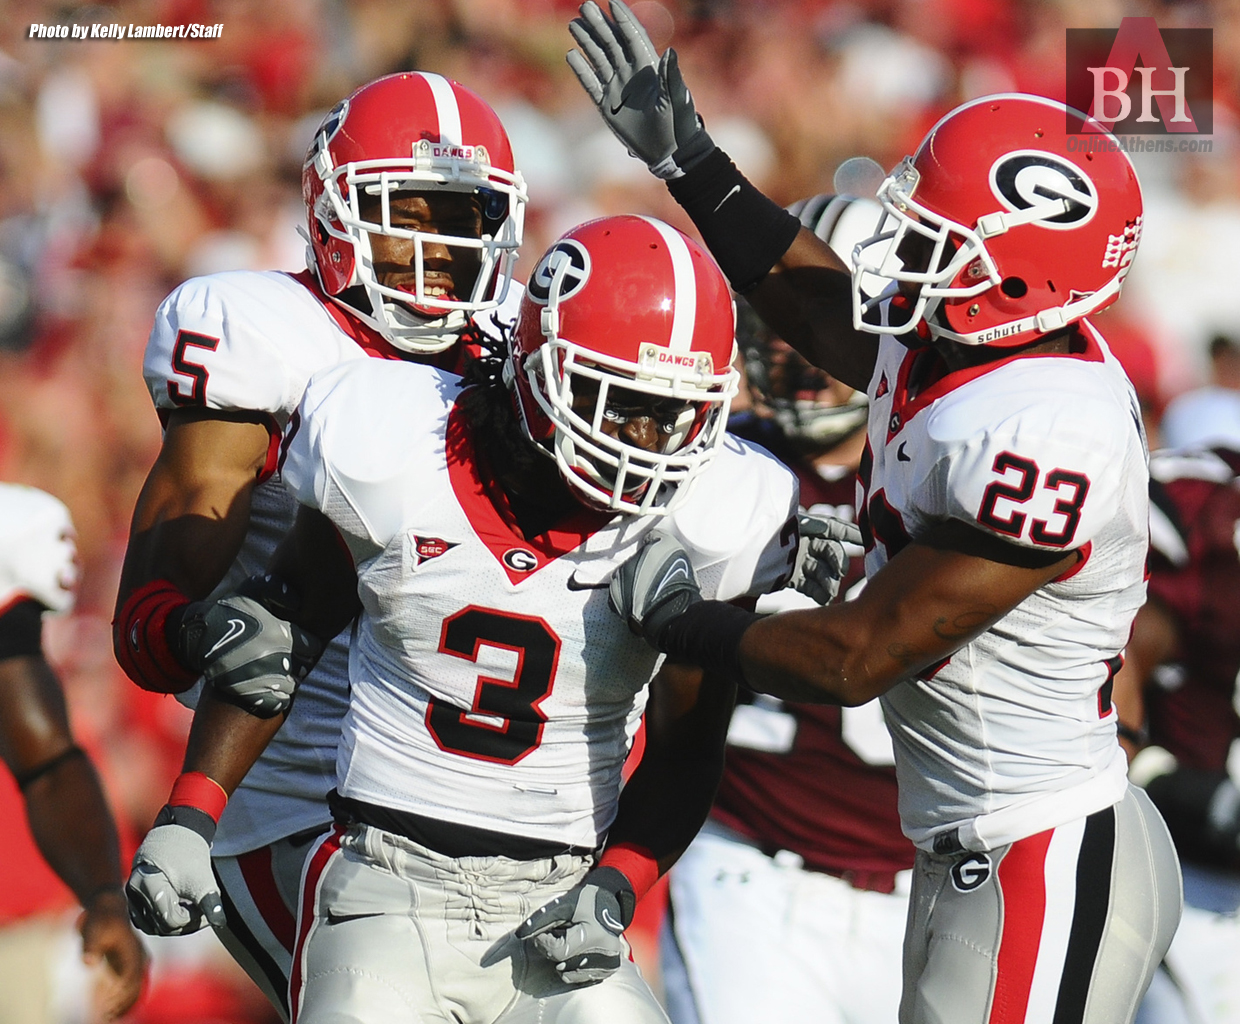 Wallpaper Scenes From The Win Over South Carolina Online Athens